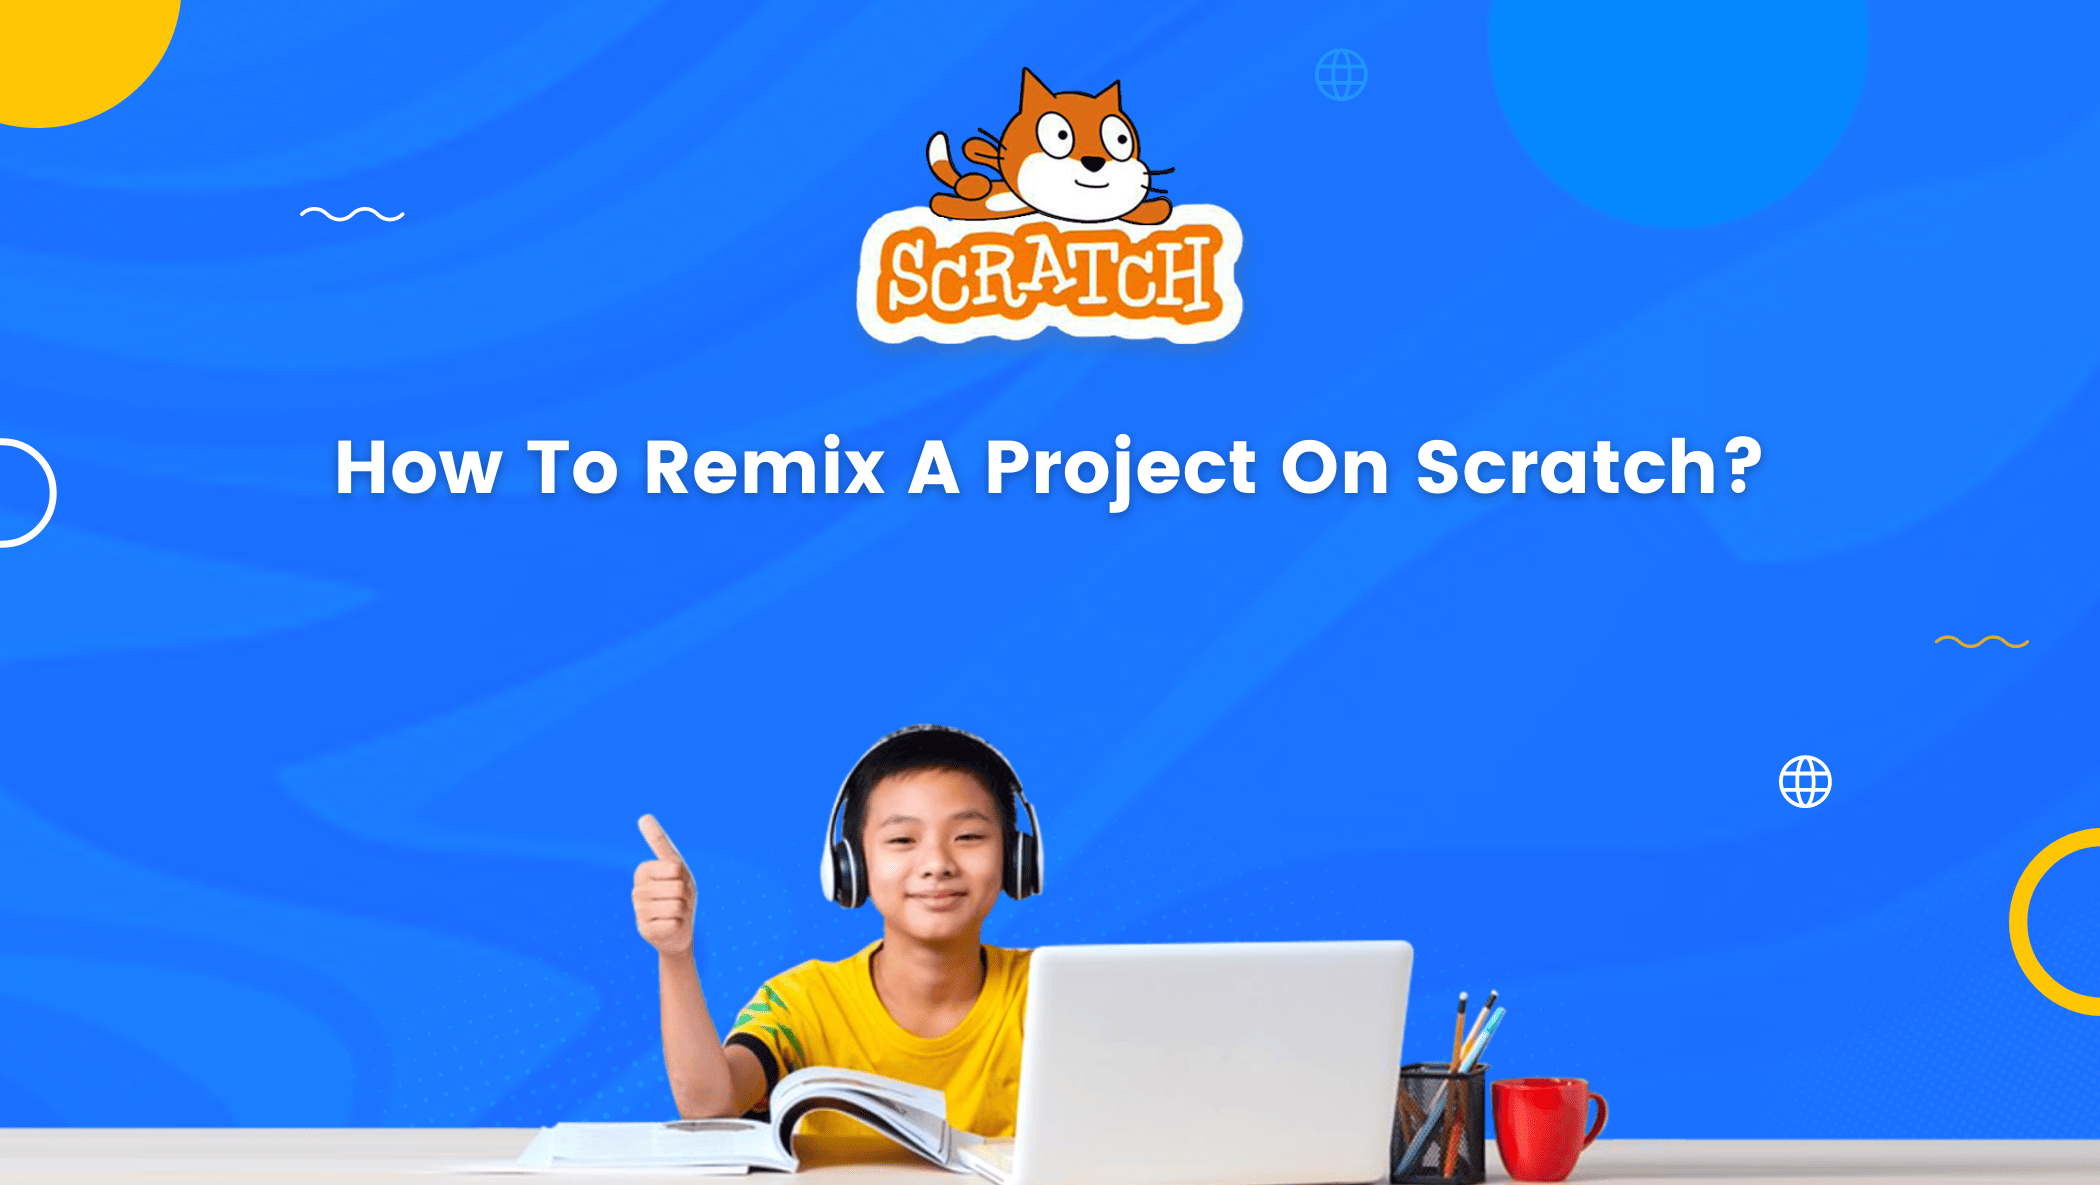 How To Remix A Project On Scratch